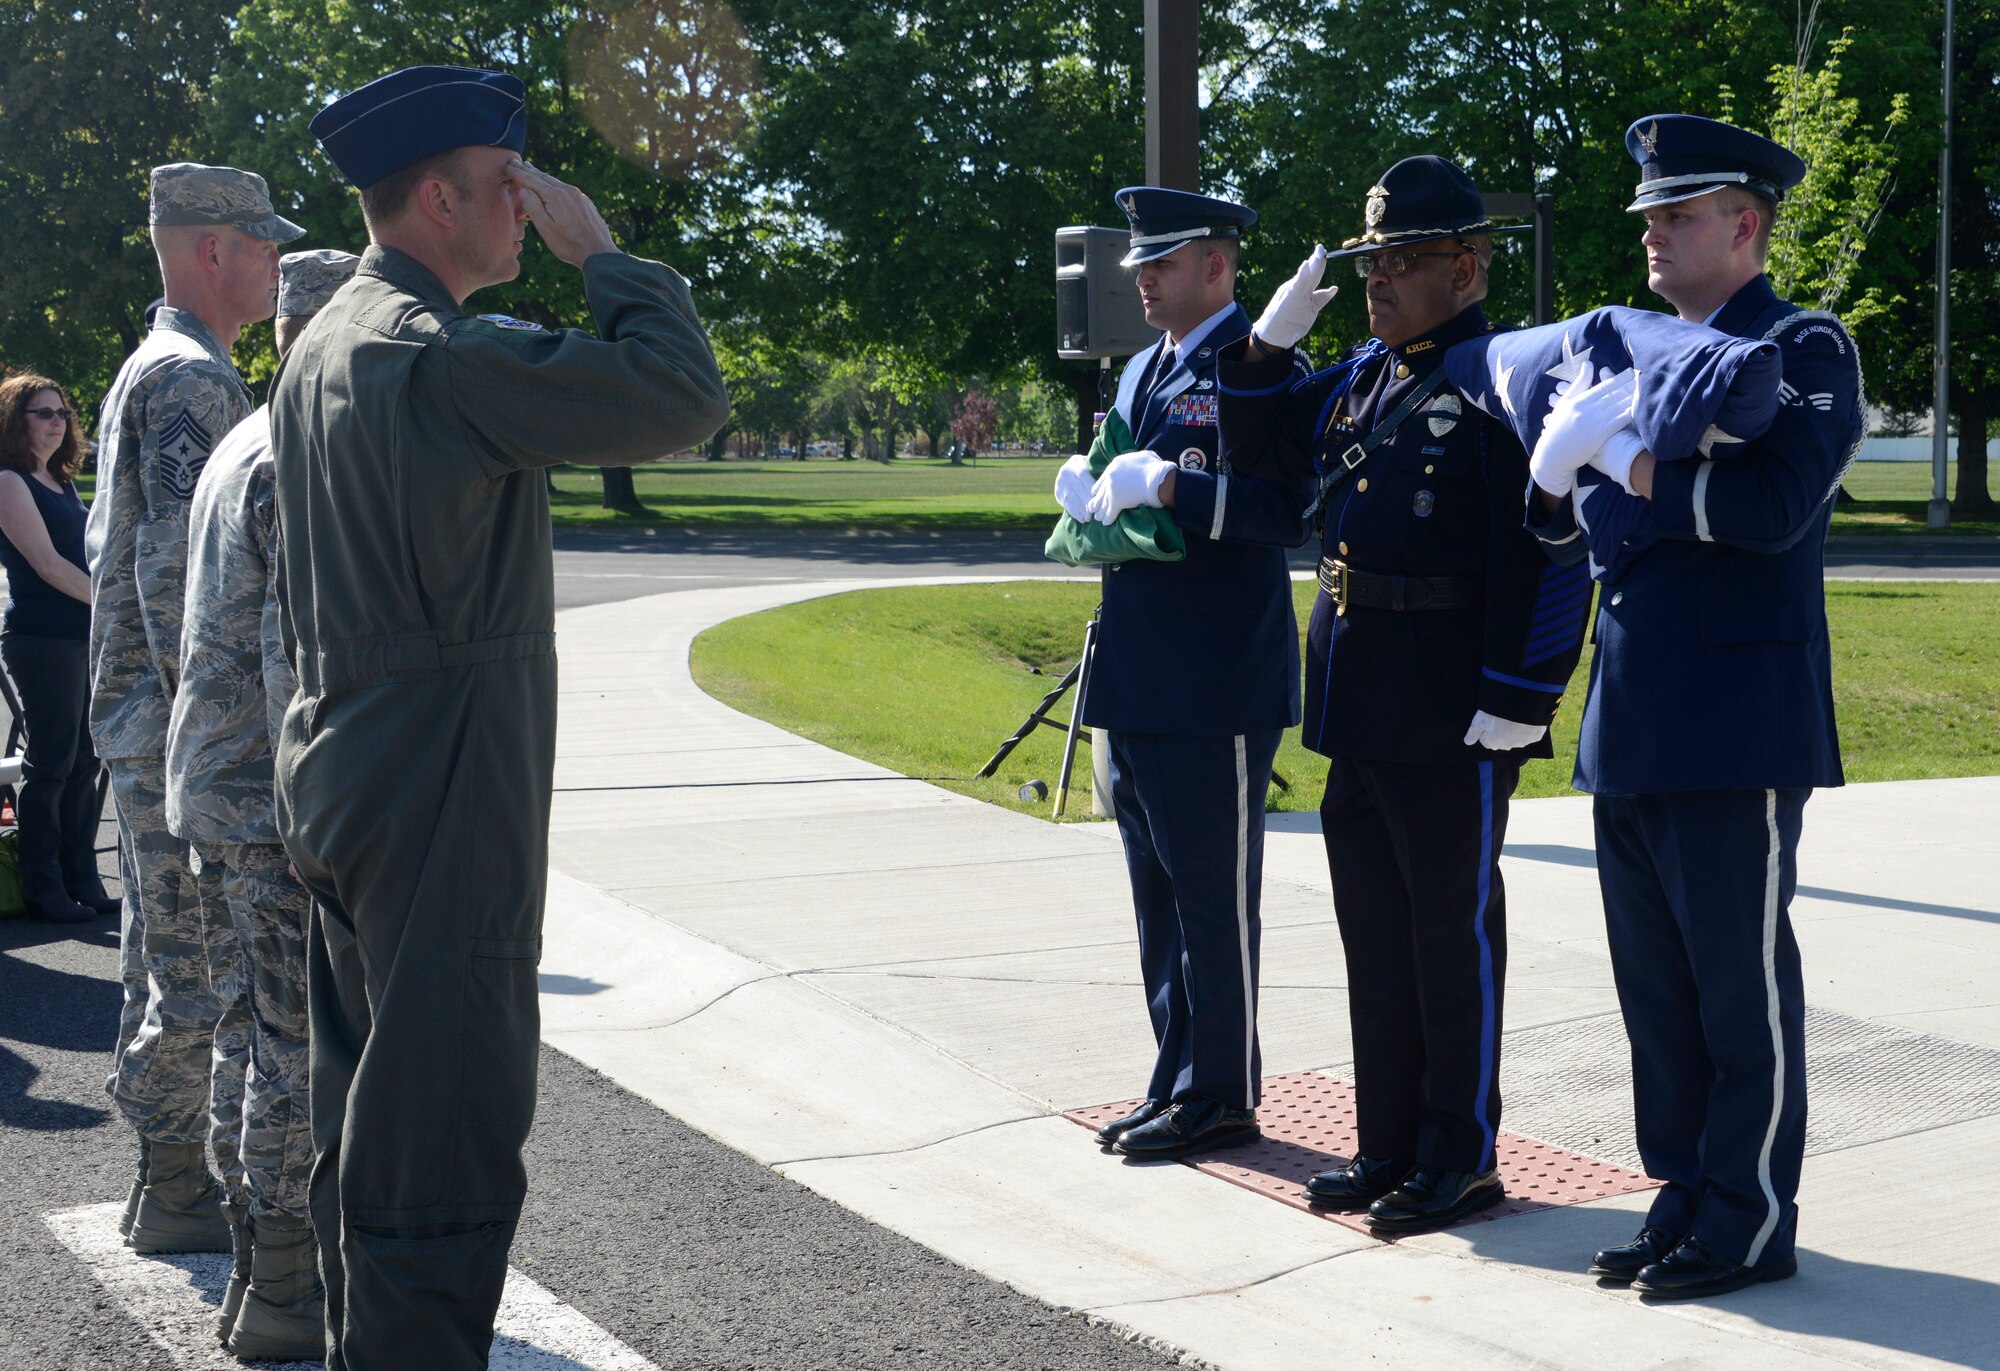 Col. Johan Deutscher, 141st Air Refueling Wing commander, renders a salute to the colors presented by members of the Fairchild Air Force Base Honor Guard and a law enforcement officer during a National Police Week Memorial Retreat Ceremony at Fairchild AFB, Washington, May 16, 2018. A retreat ceremony was held in remembrance of fallen law enforcement members with the U.S. flag being retired.